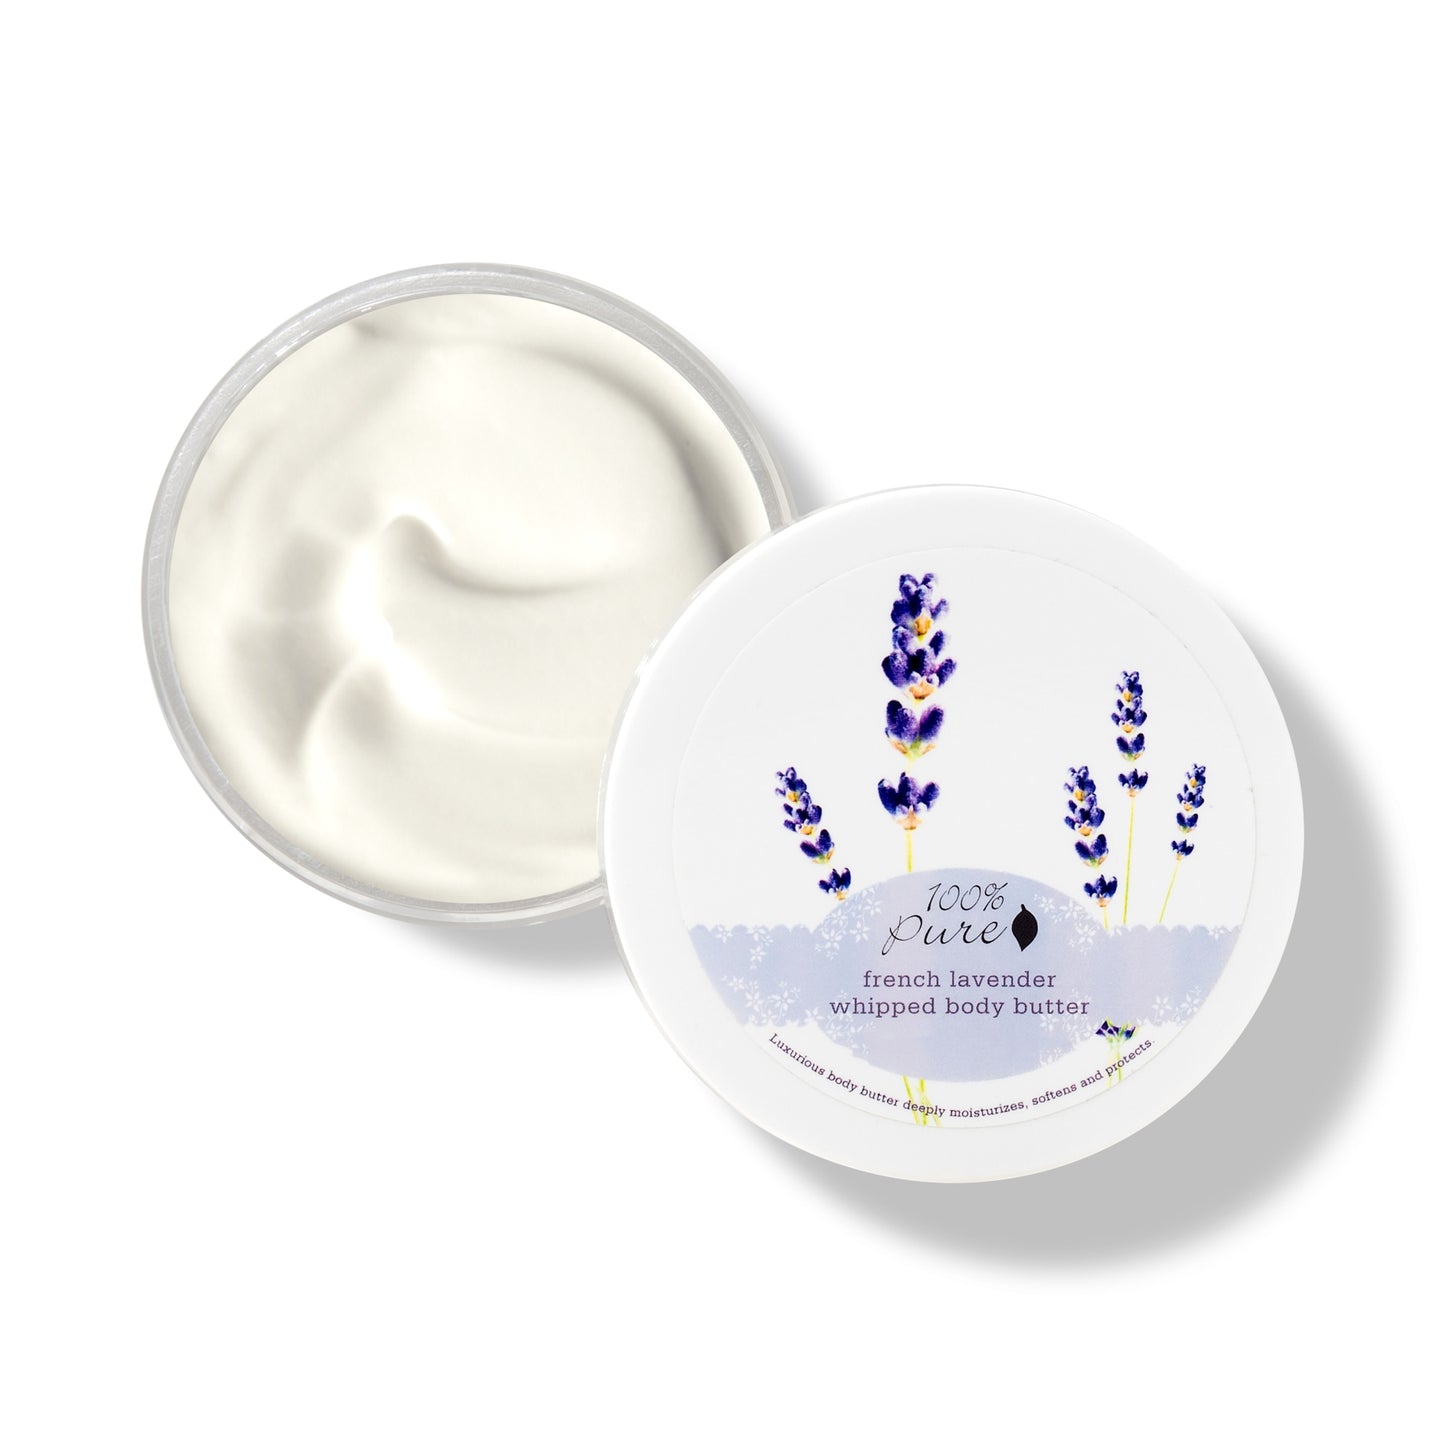 100% PURE French Lavender Whipped Body Butter